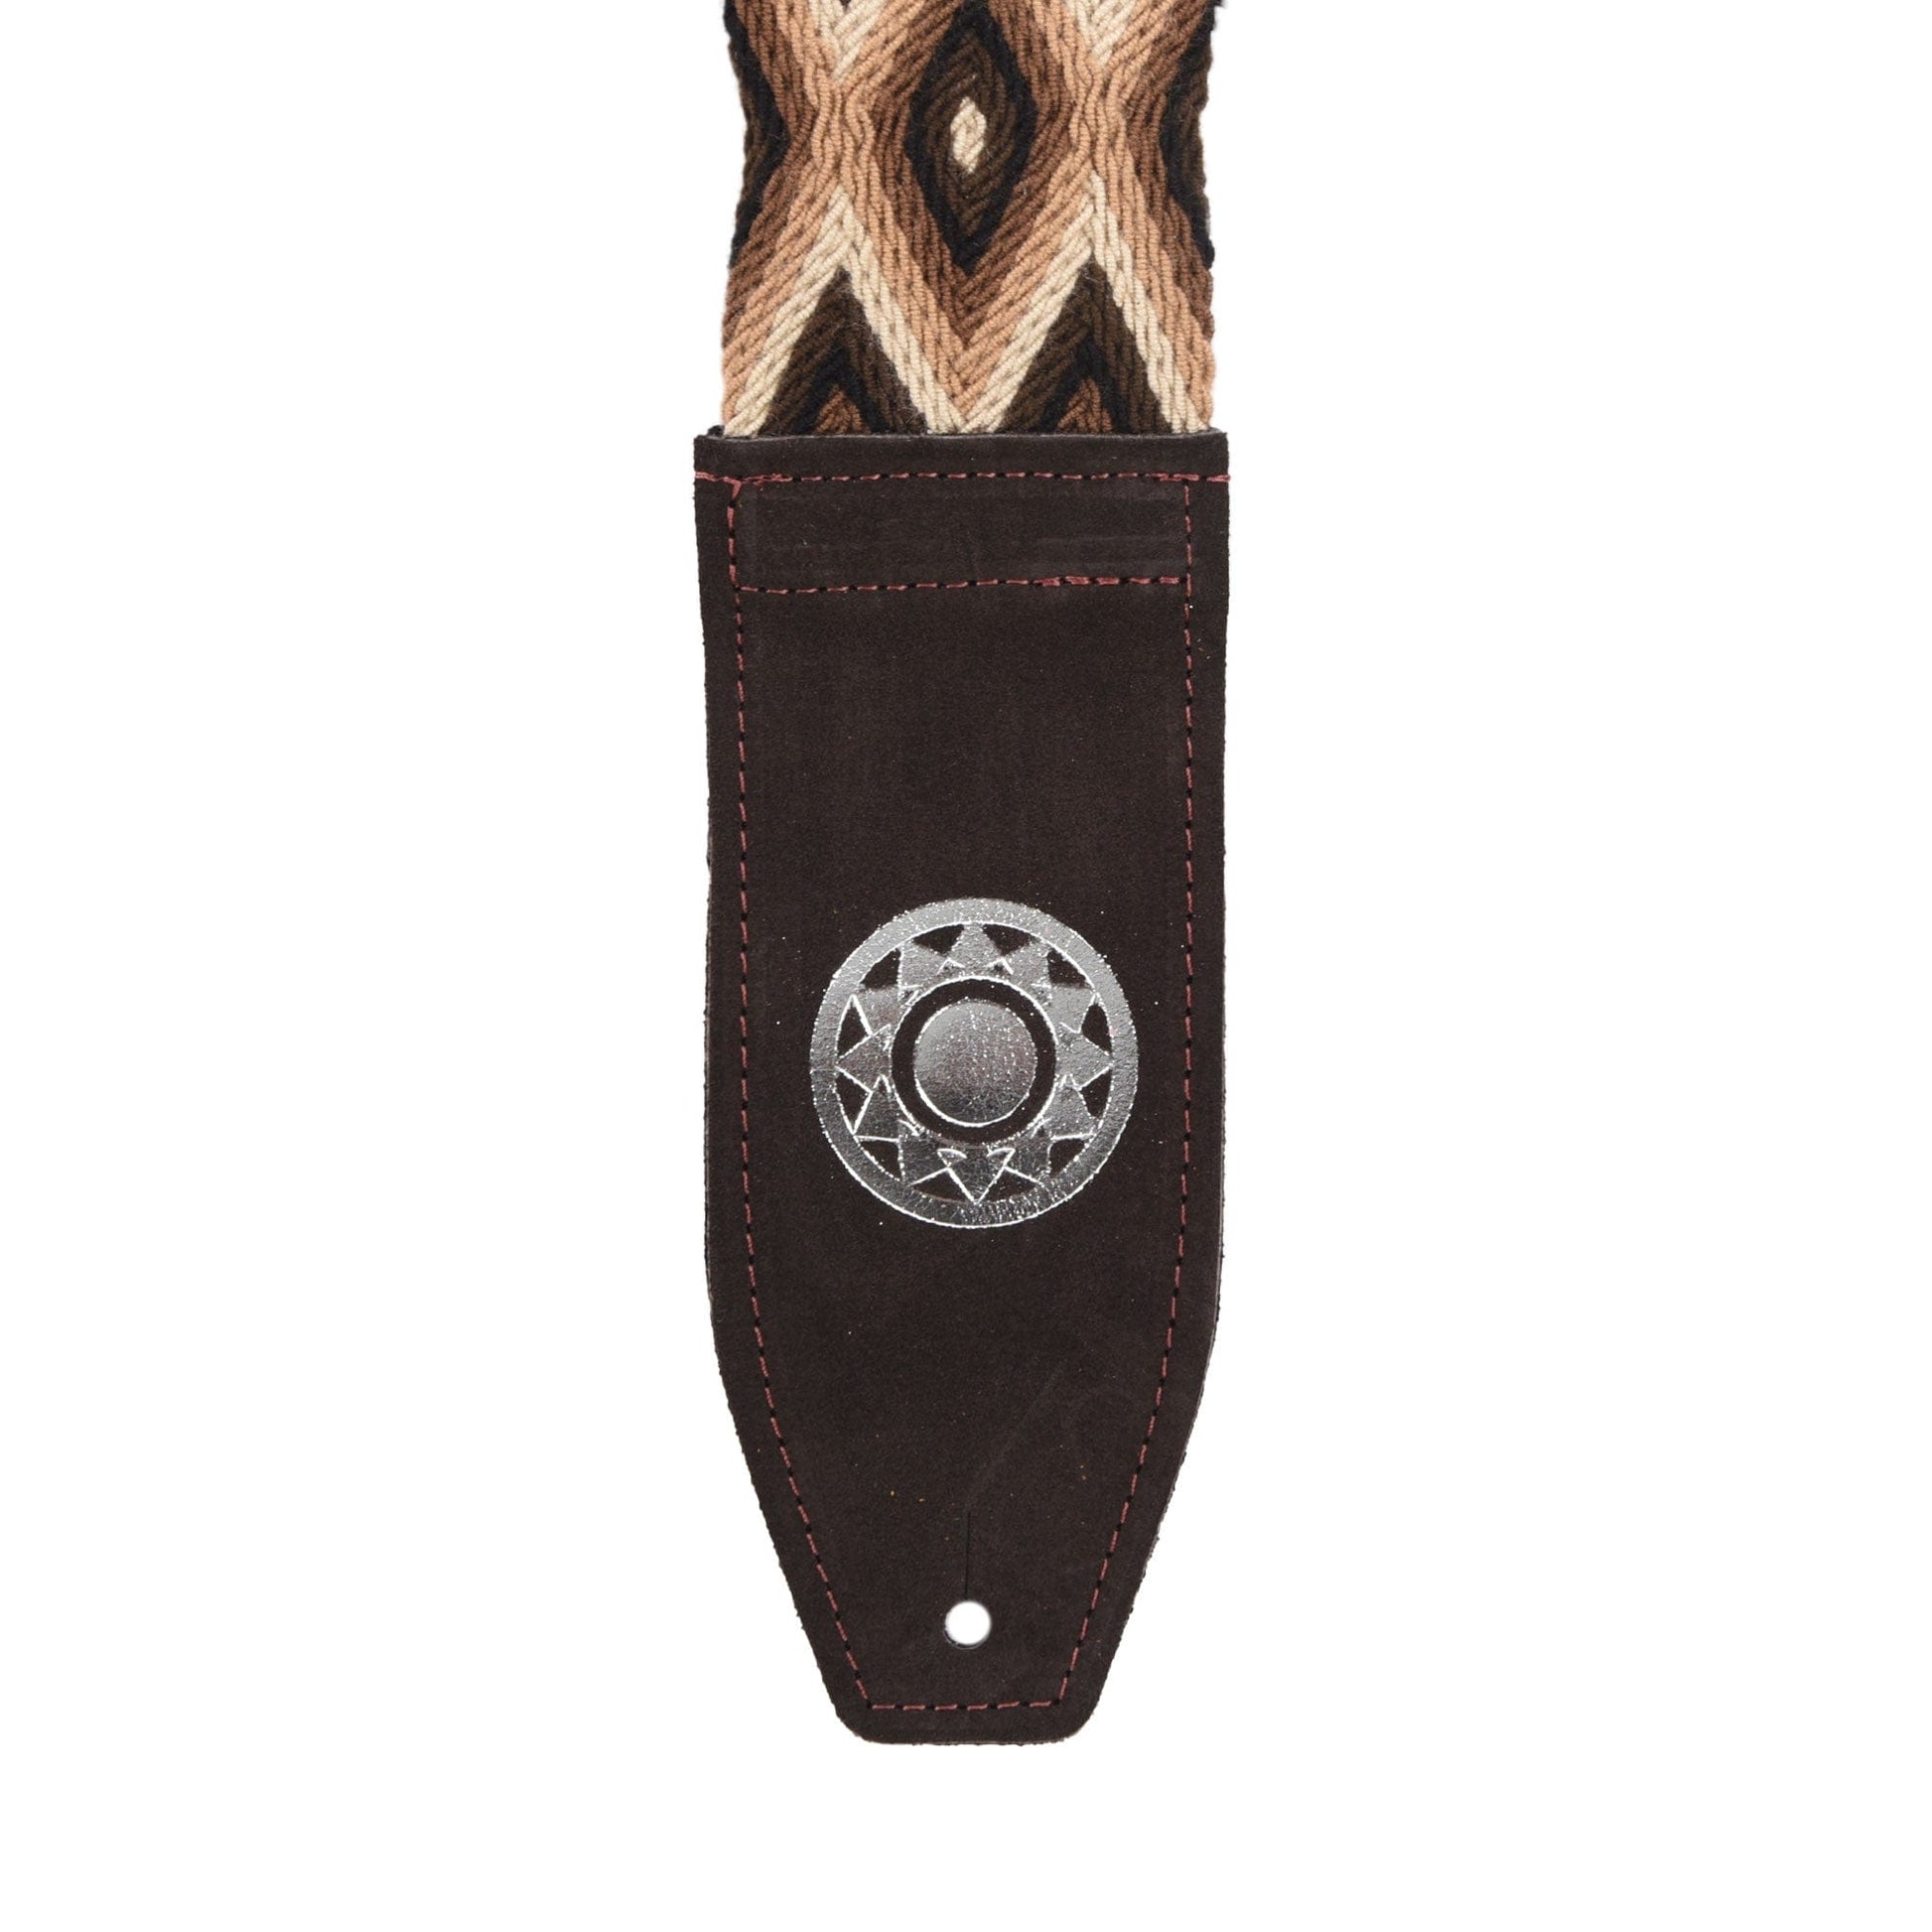 Souldier DreamWeaver - One-of-a-Kind Hand Woven Guitar Strap #21 Accessories / Straps